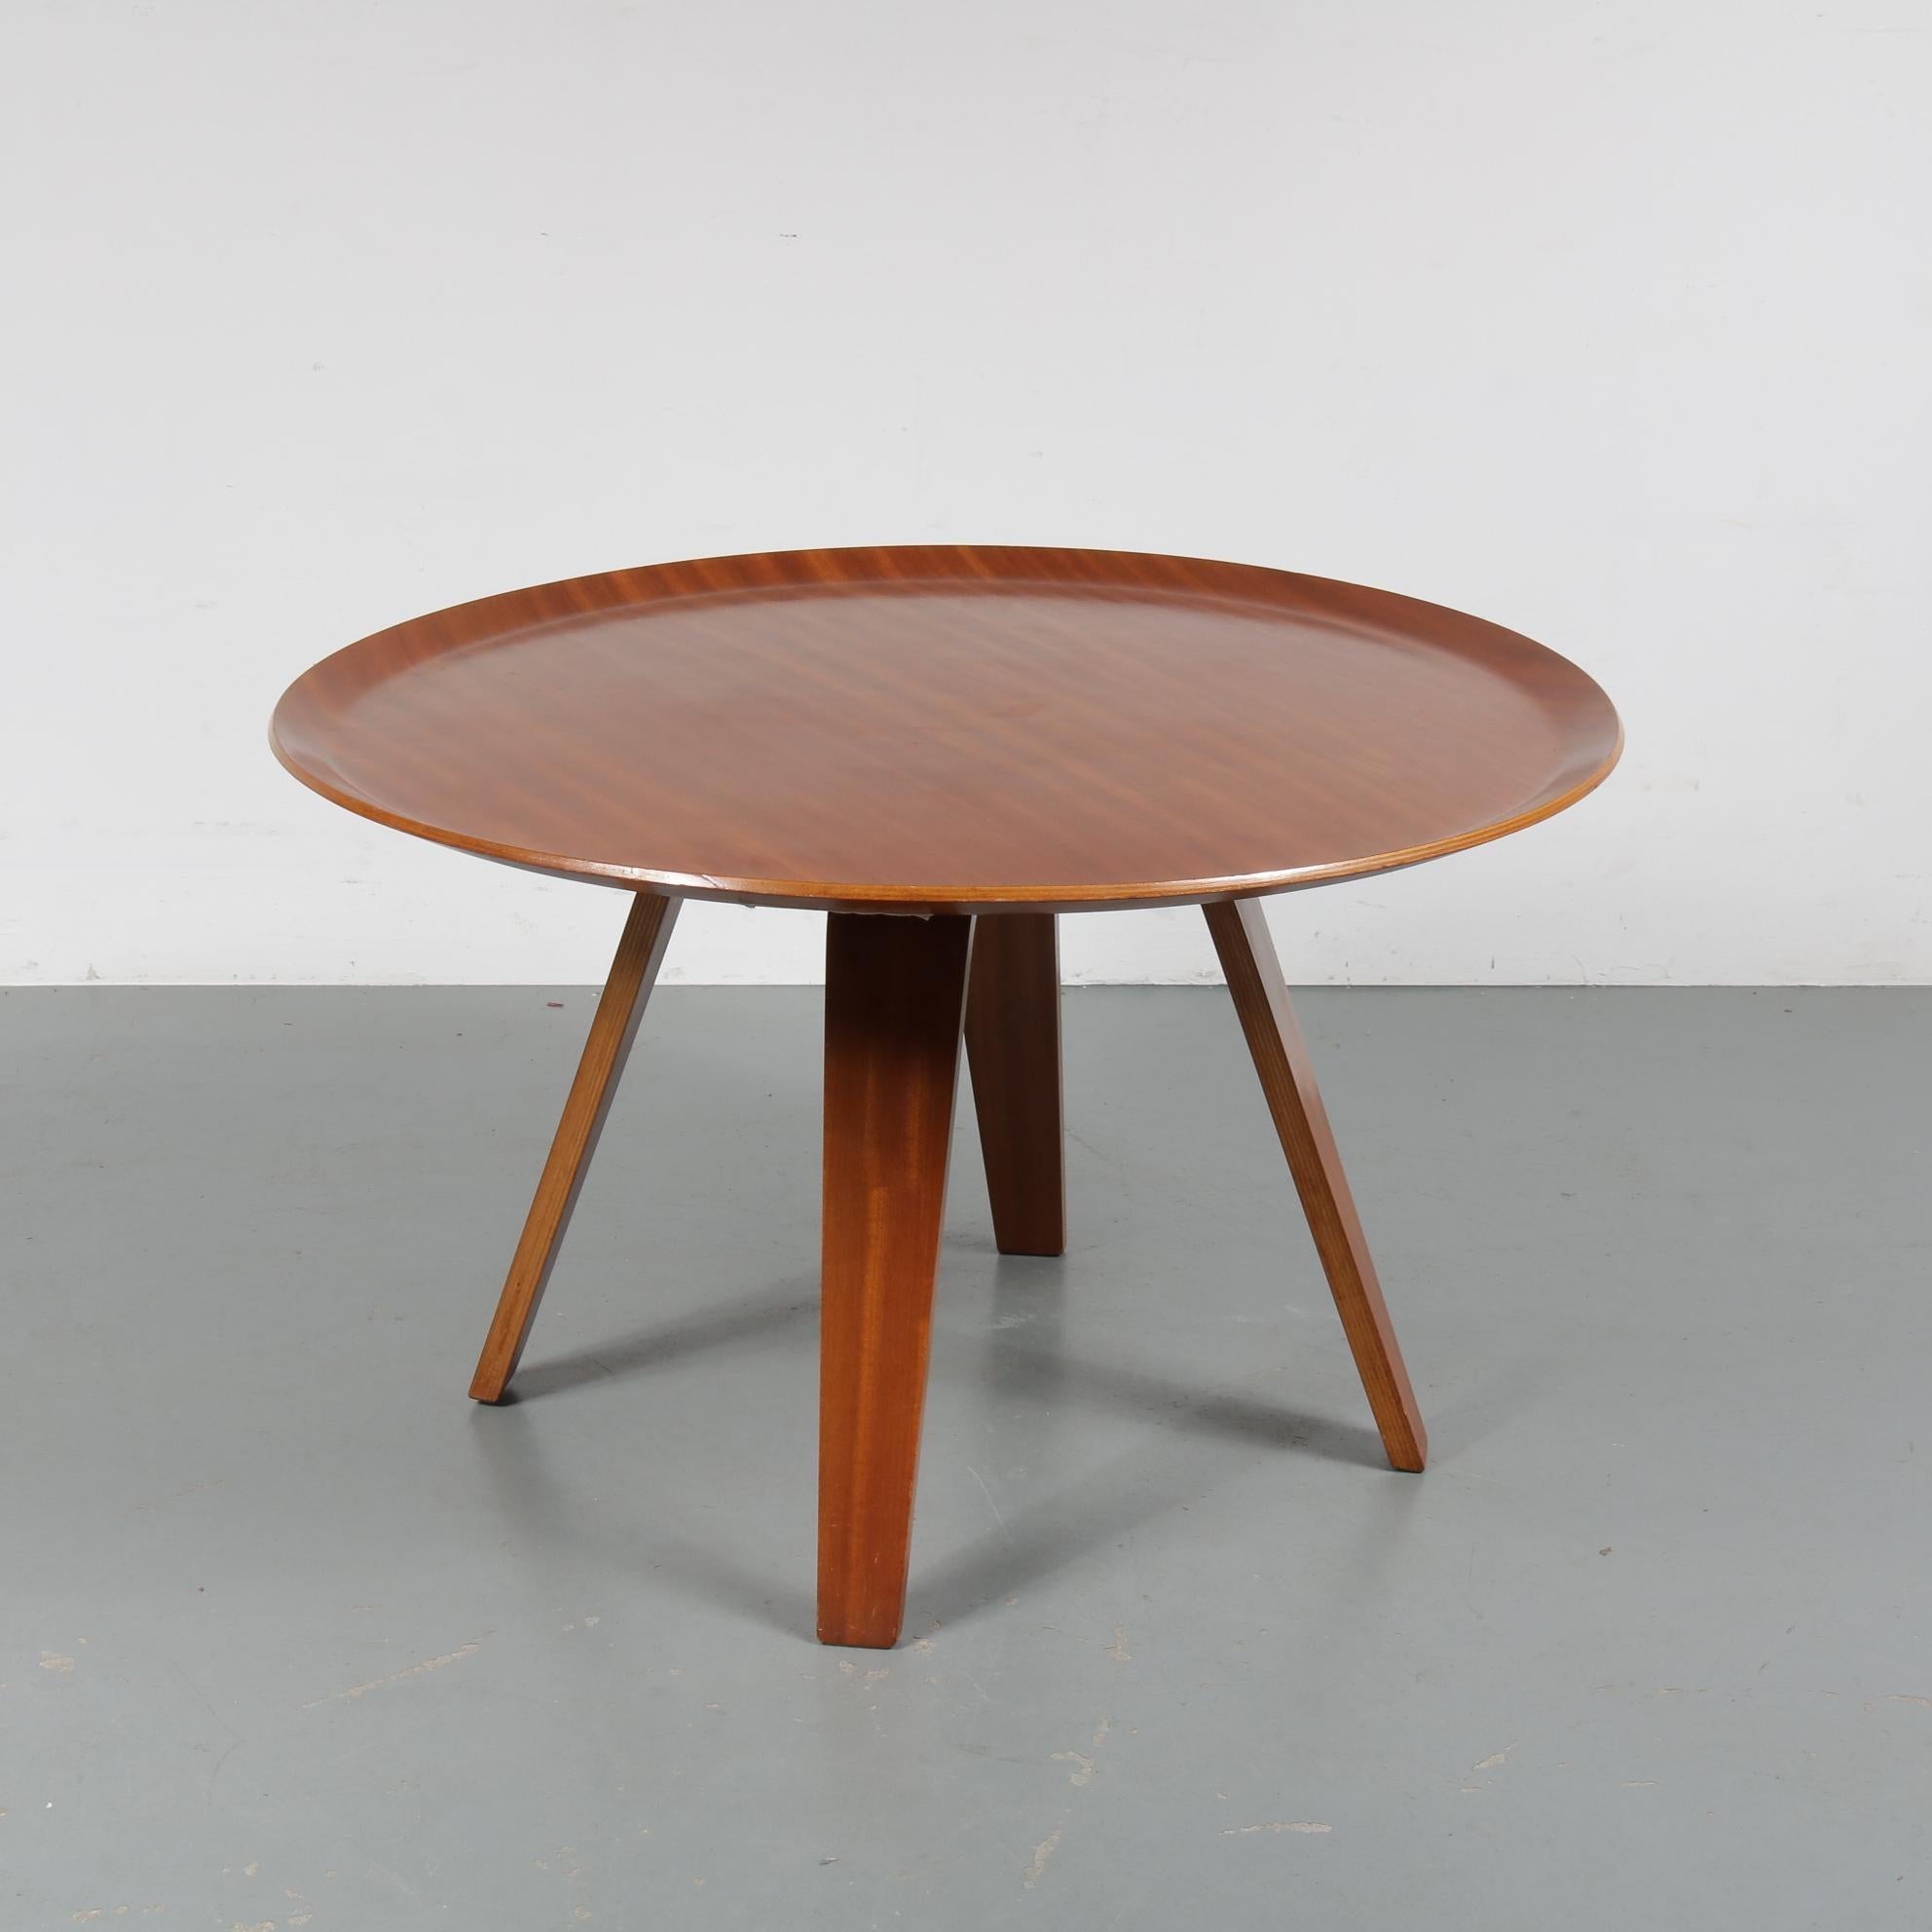 A beautiful rare coffee table designed by Cor Alons, manufactured by De Boer Gouda in the Netherlands, 1950.

It is completely made of high quality teak plywood in beautiful round and bent shapes, creating a very elegant yet modern style! The table